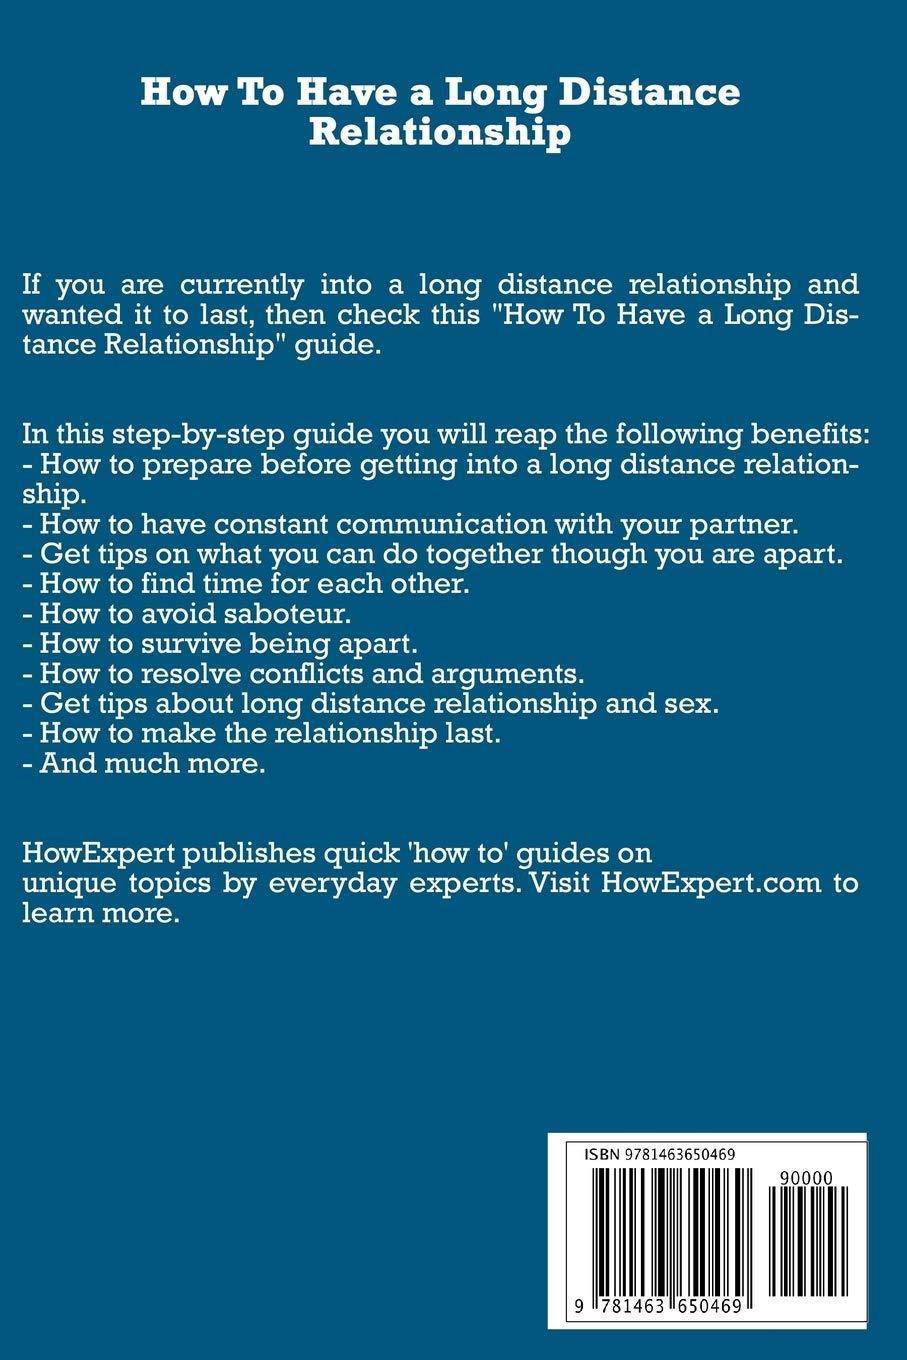 How To Have A Long Distance Relationship - SureShot Books Publishing LLC